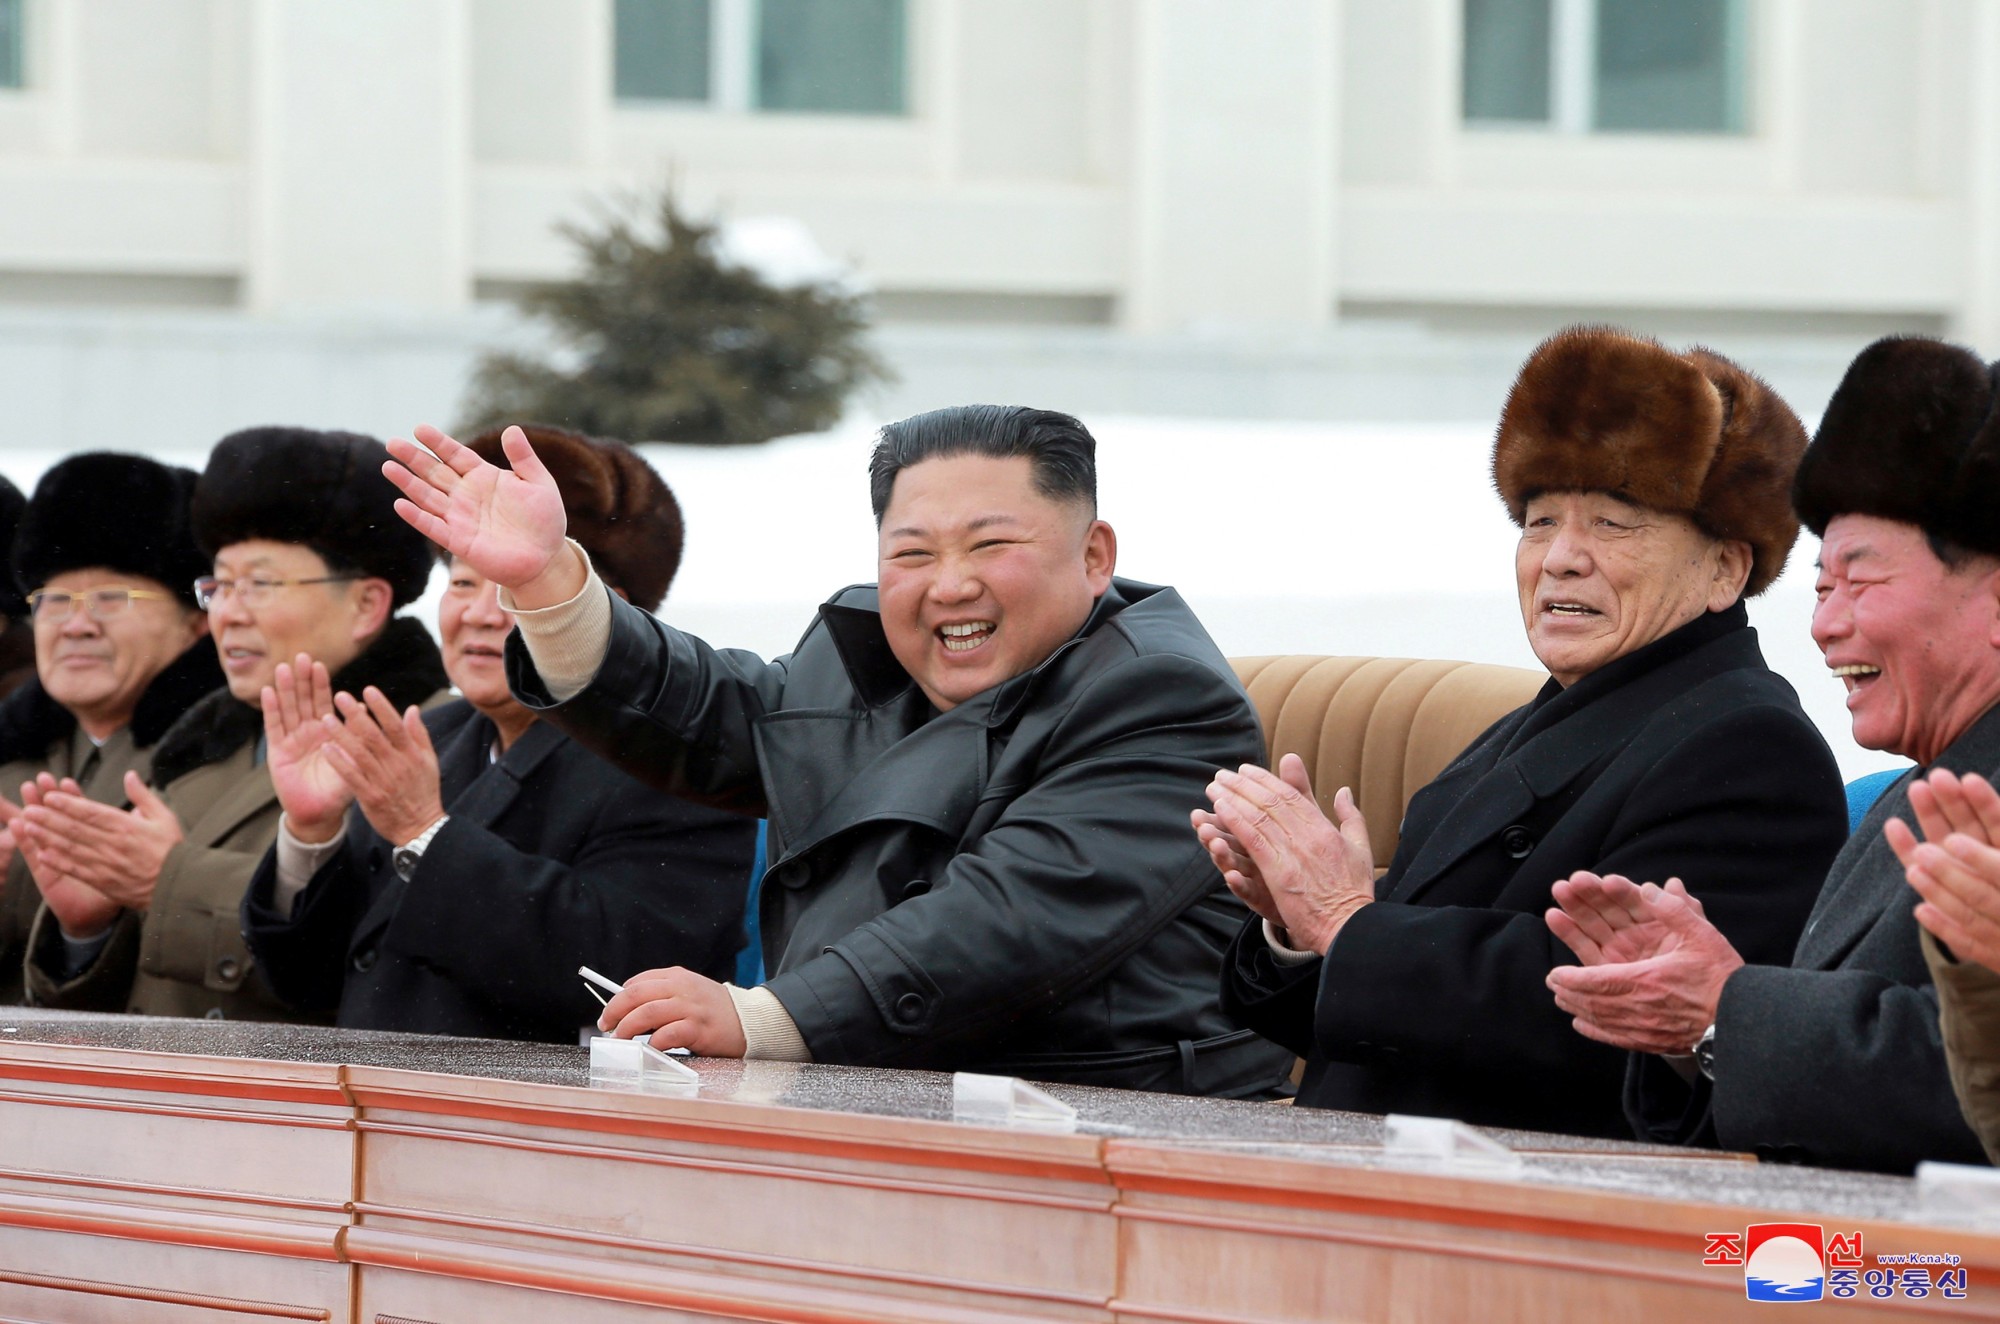 North Korean leader Kim Jong Un, accompanied by Pak Pong Ju, vice-chairman of the State Affairs Commission, attends a ceremony at the township of Samjiyon County in this undated picture released Tuesday. | KCNA / VIA REUTERS